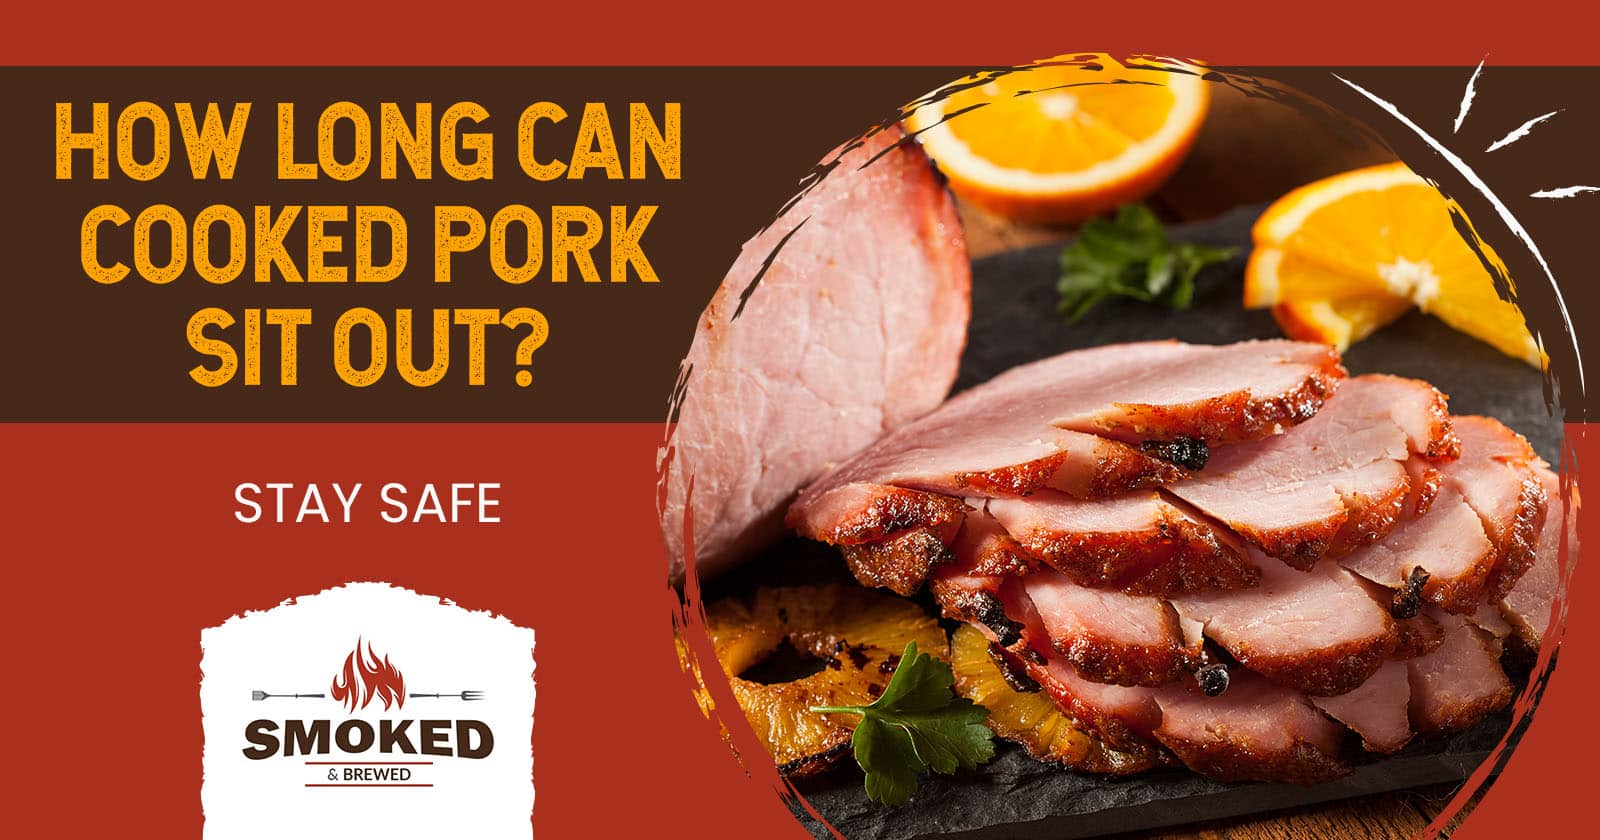 How Long Can Cooked Pork Sit Out? [STAY SAFE]